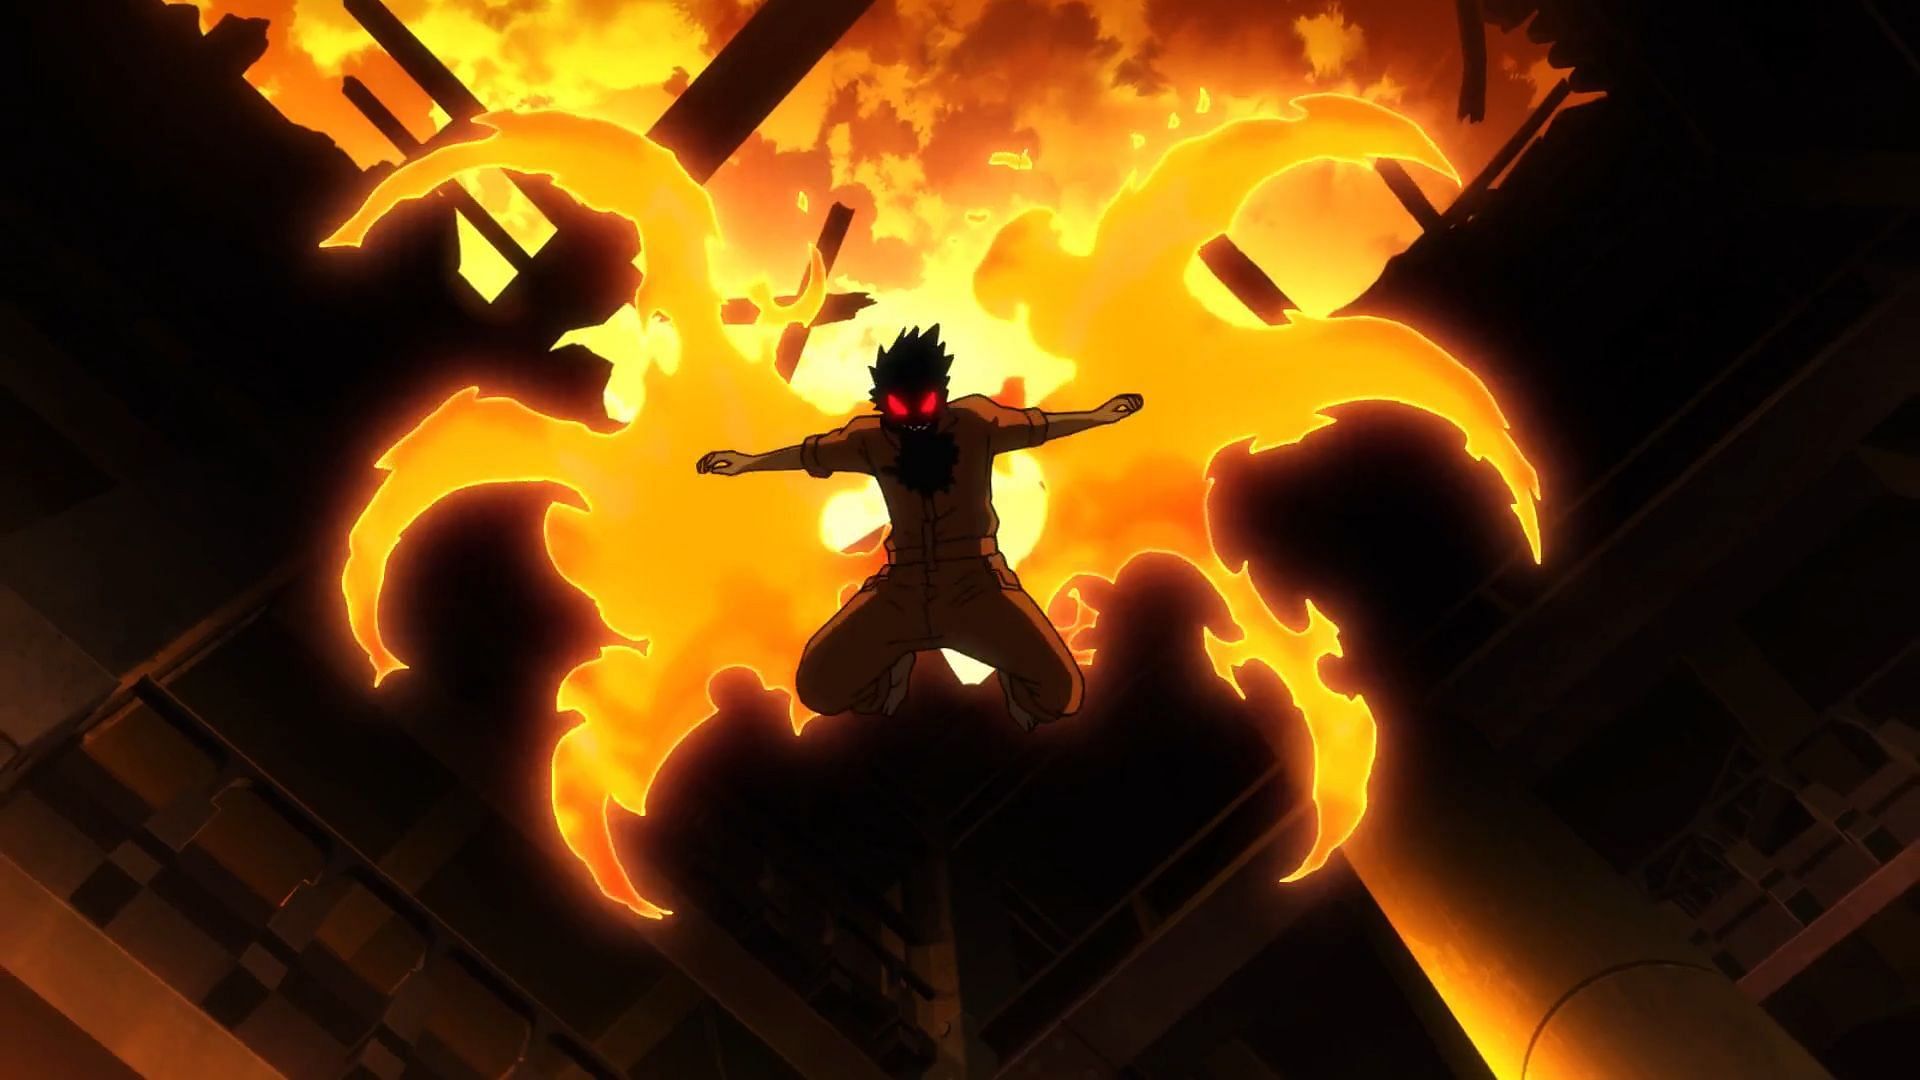 10 strongest characters of Fire Force, ranked